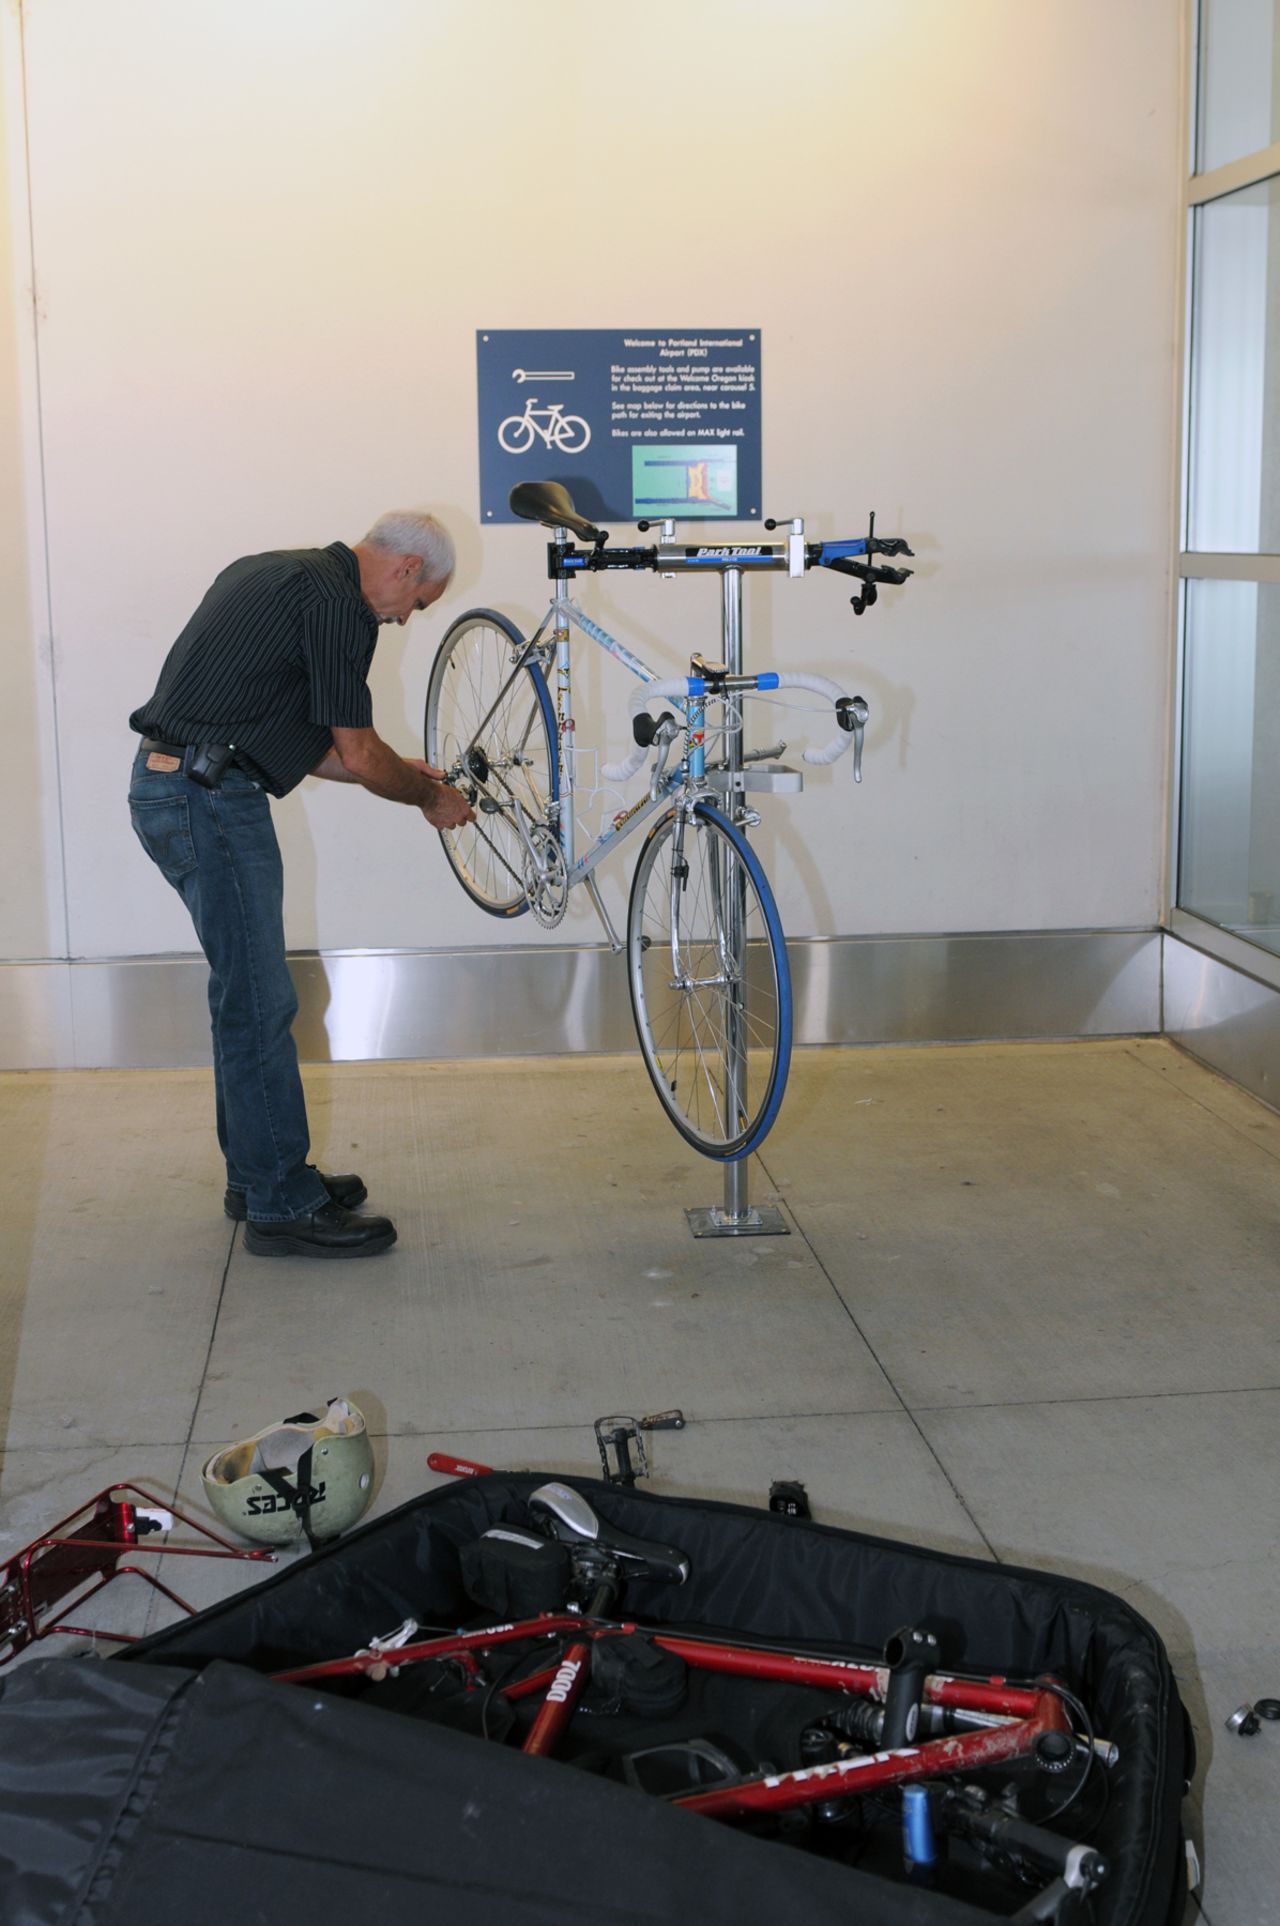 Portland, Oregon, is widely regarded as one of the nation¹s most bikeable cities, so it's only logical its airport would want to install a bike assembly station.